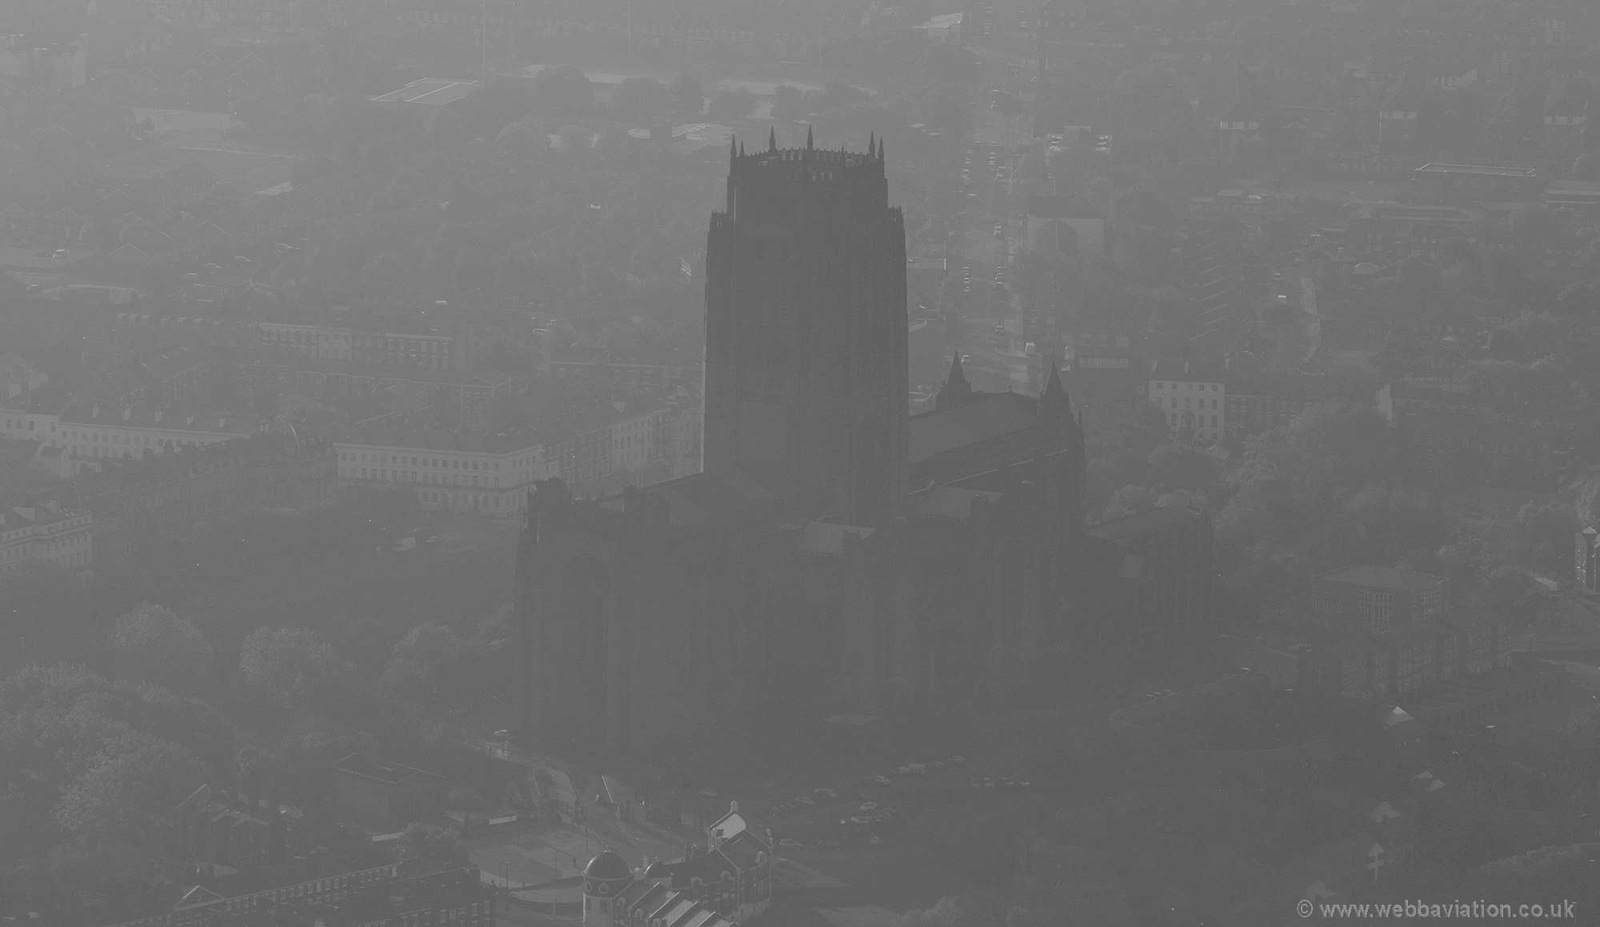 Liverpool Anglican Cathedral in the dawn mist of a foggy winters day